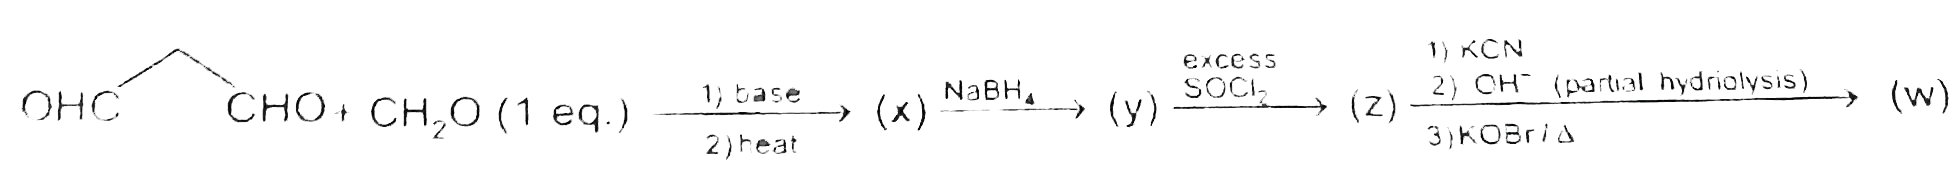 Synthesis of propellane takes placed by the following route.   Q. Product (x) in the above reaction sequence is: